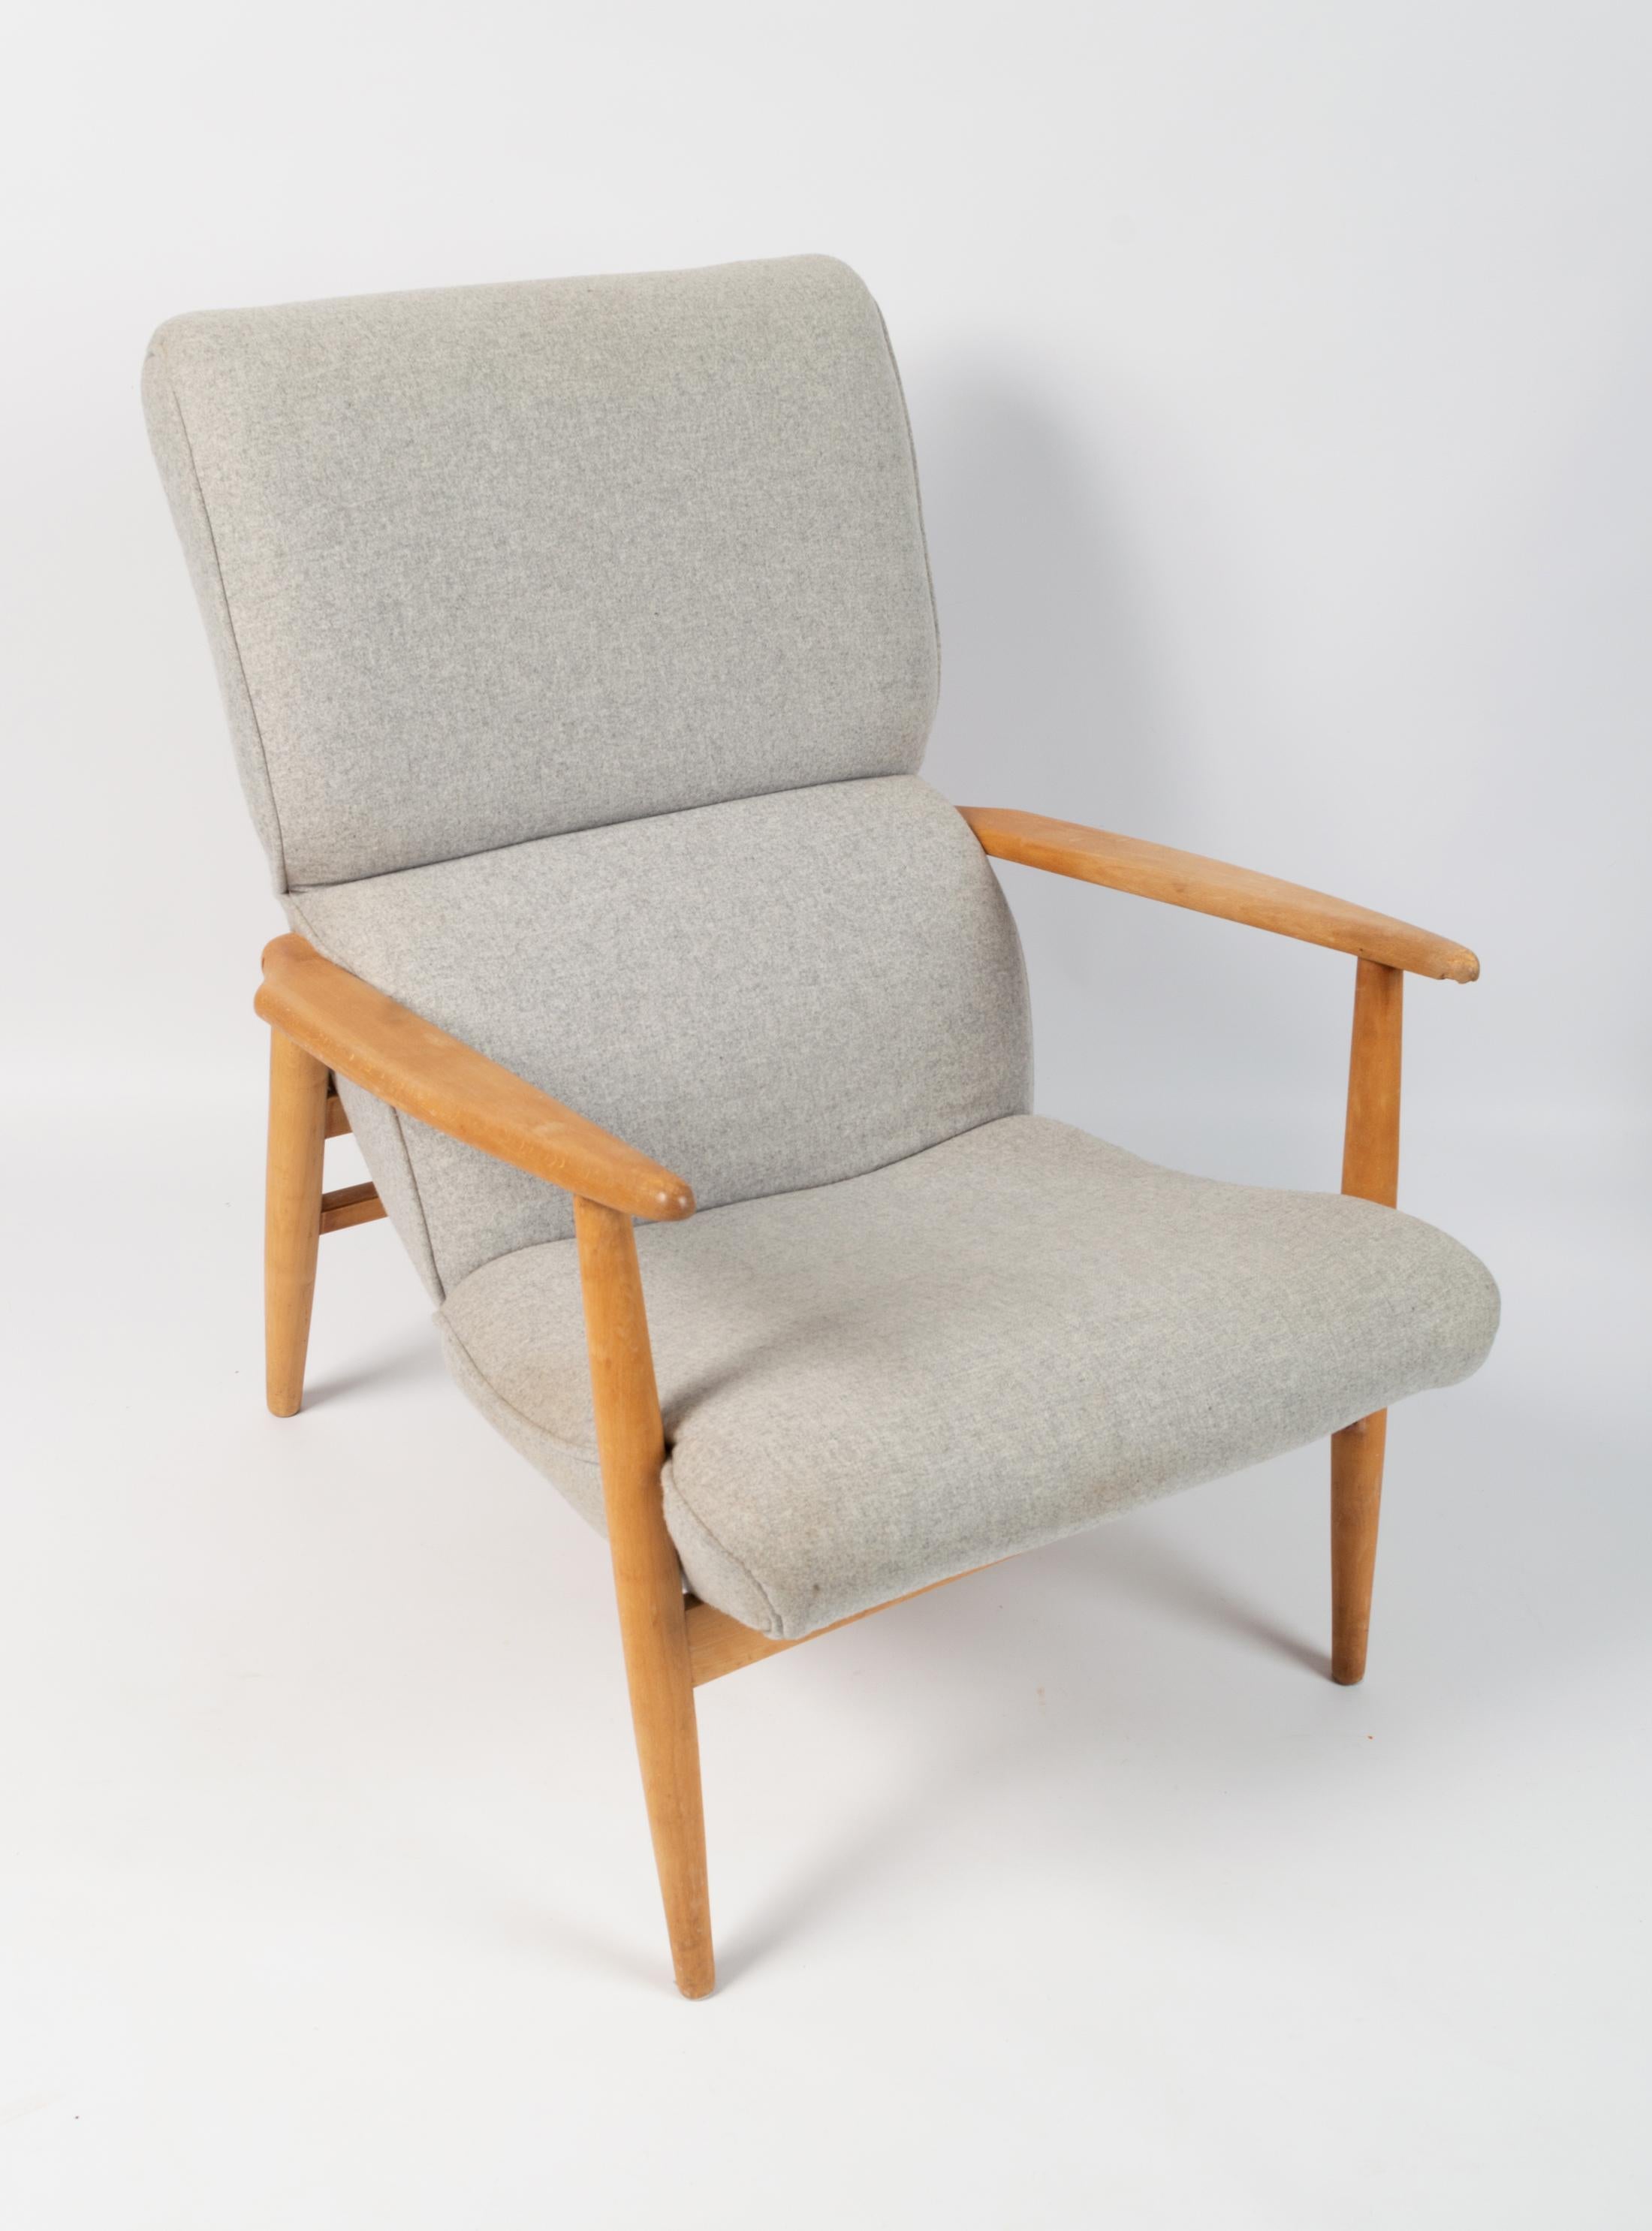 Pair of Mid-Century Danish Lounge Chairs Armchairs Denmark, C.1950 For Sale 5